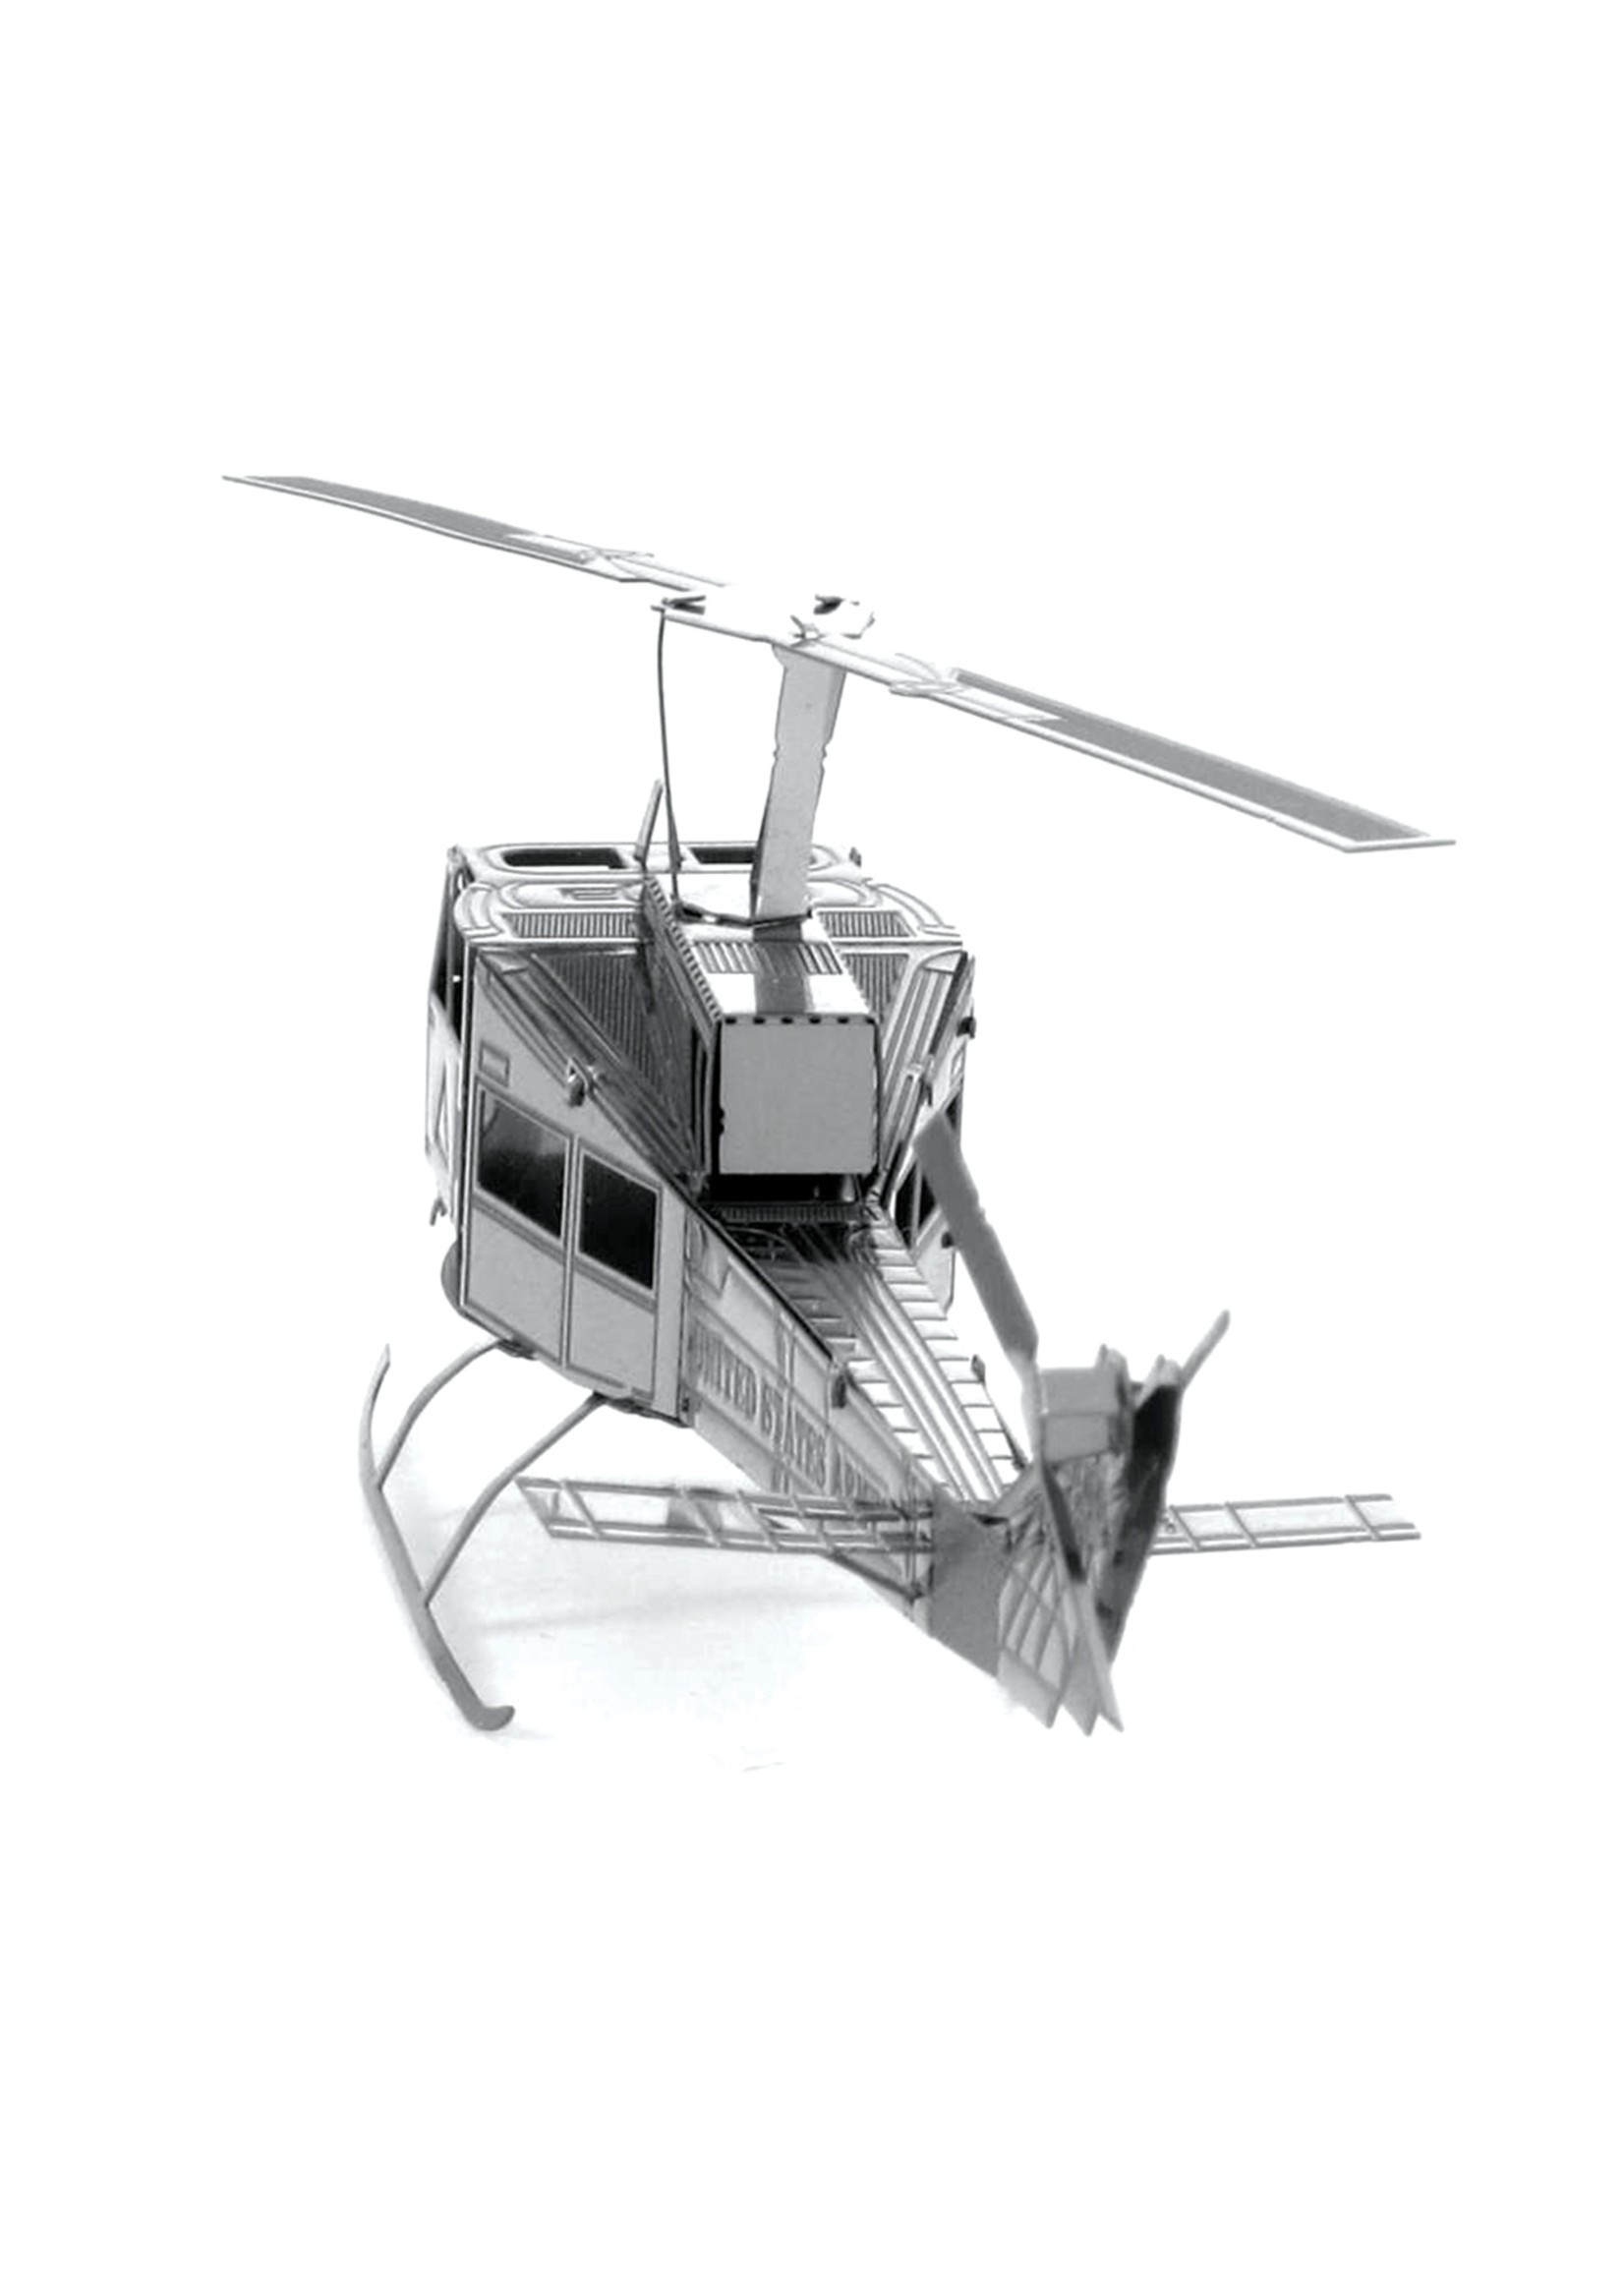 Fascinations Metal Earth - Huey Helicopter